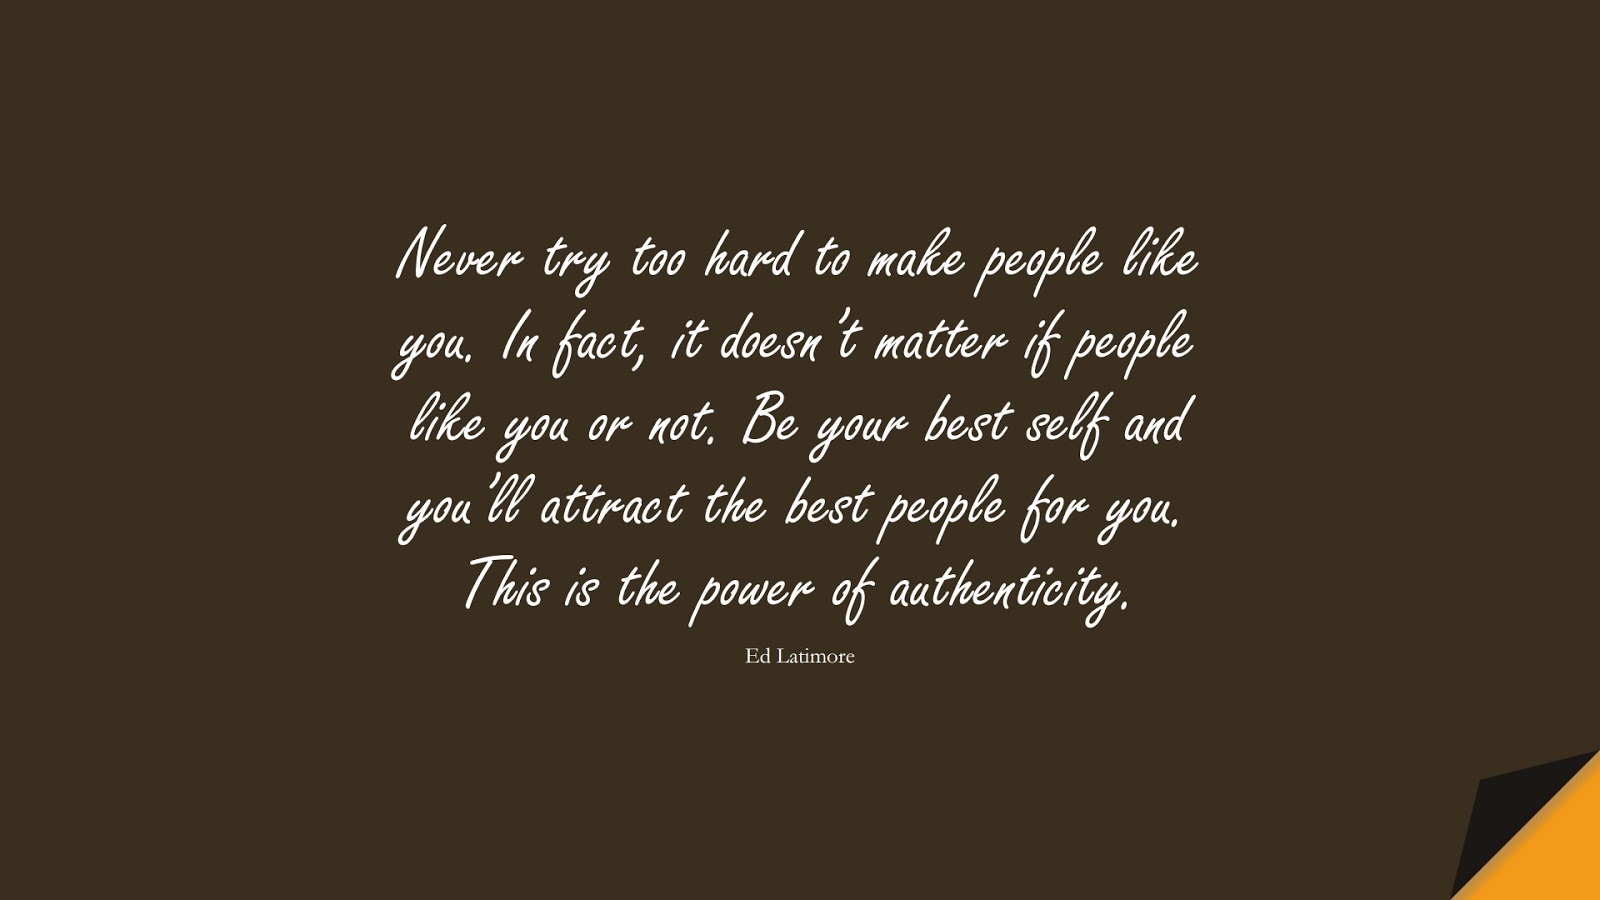 Never try too hard to make people like you. In fact, it doesn’t matter if people like you or not. Be your best self and you’ll attract the best people for you. This is the power of authenticity. (Ed Latimore);  #BeYourselfQuotes